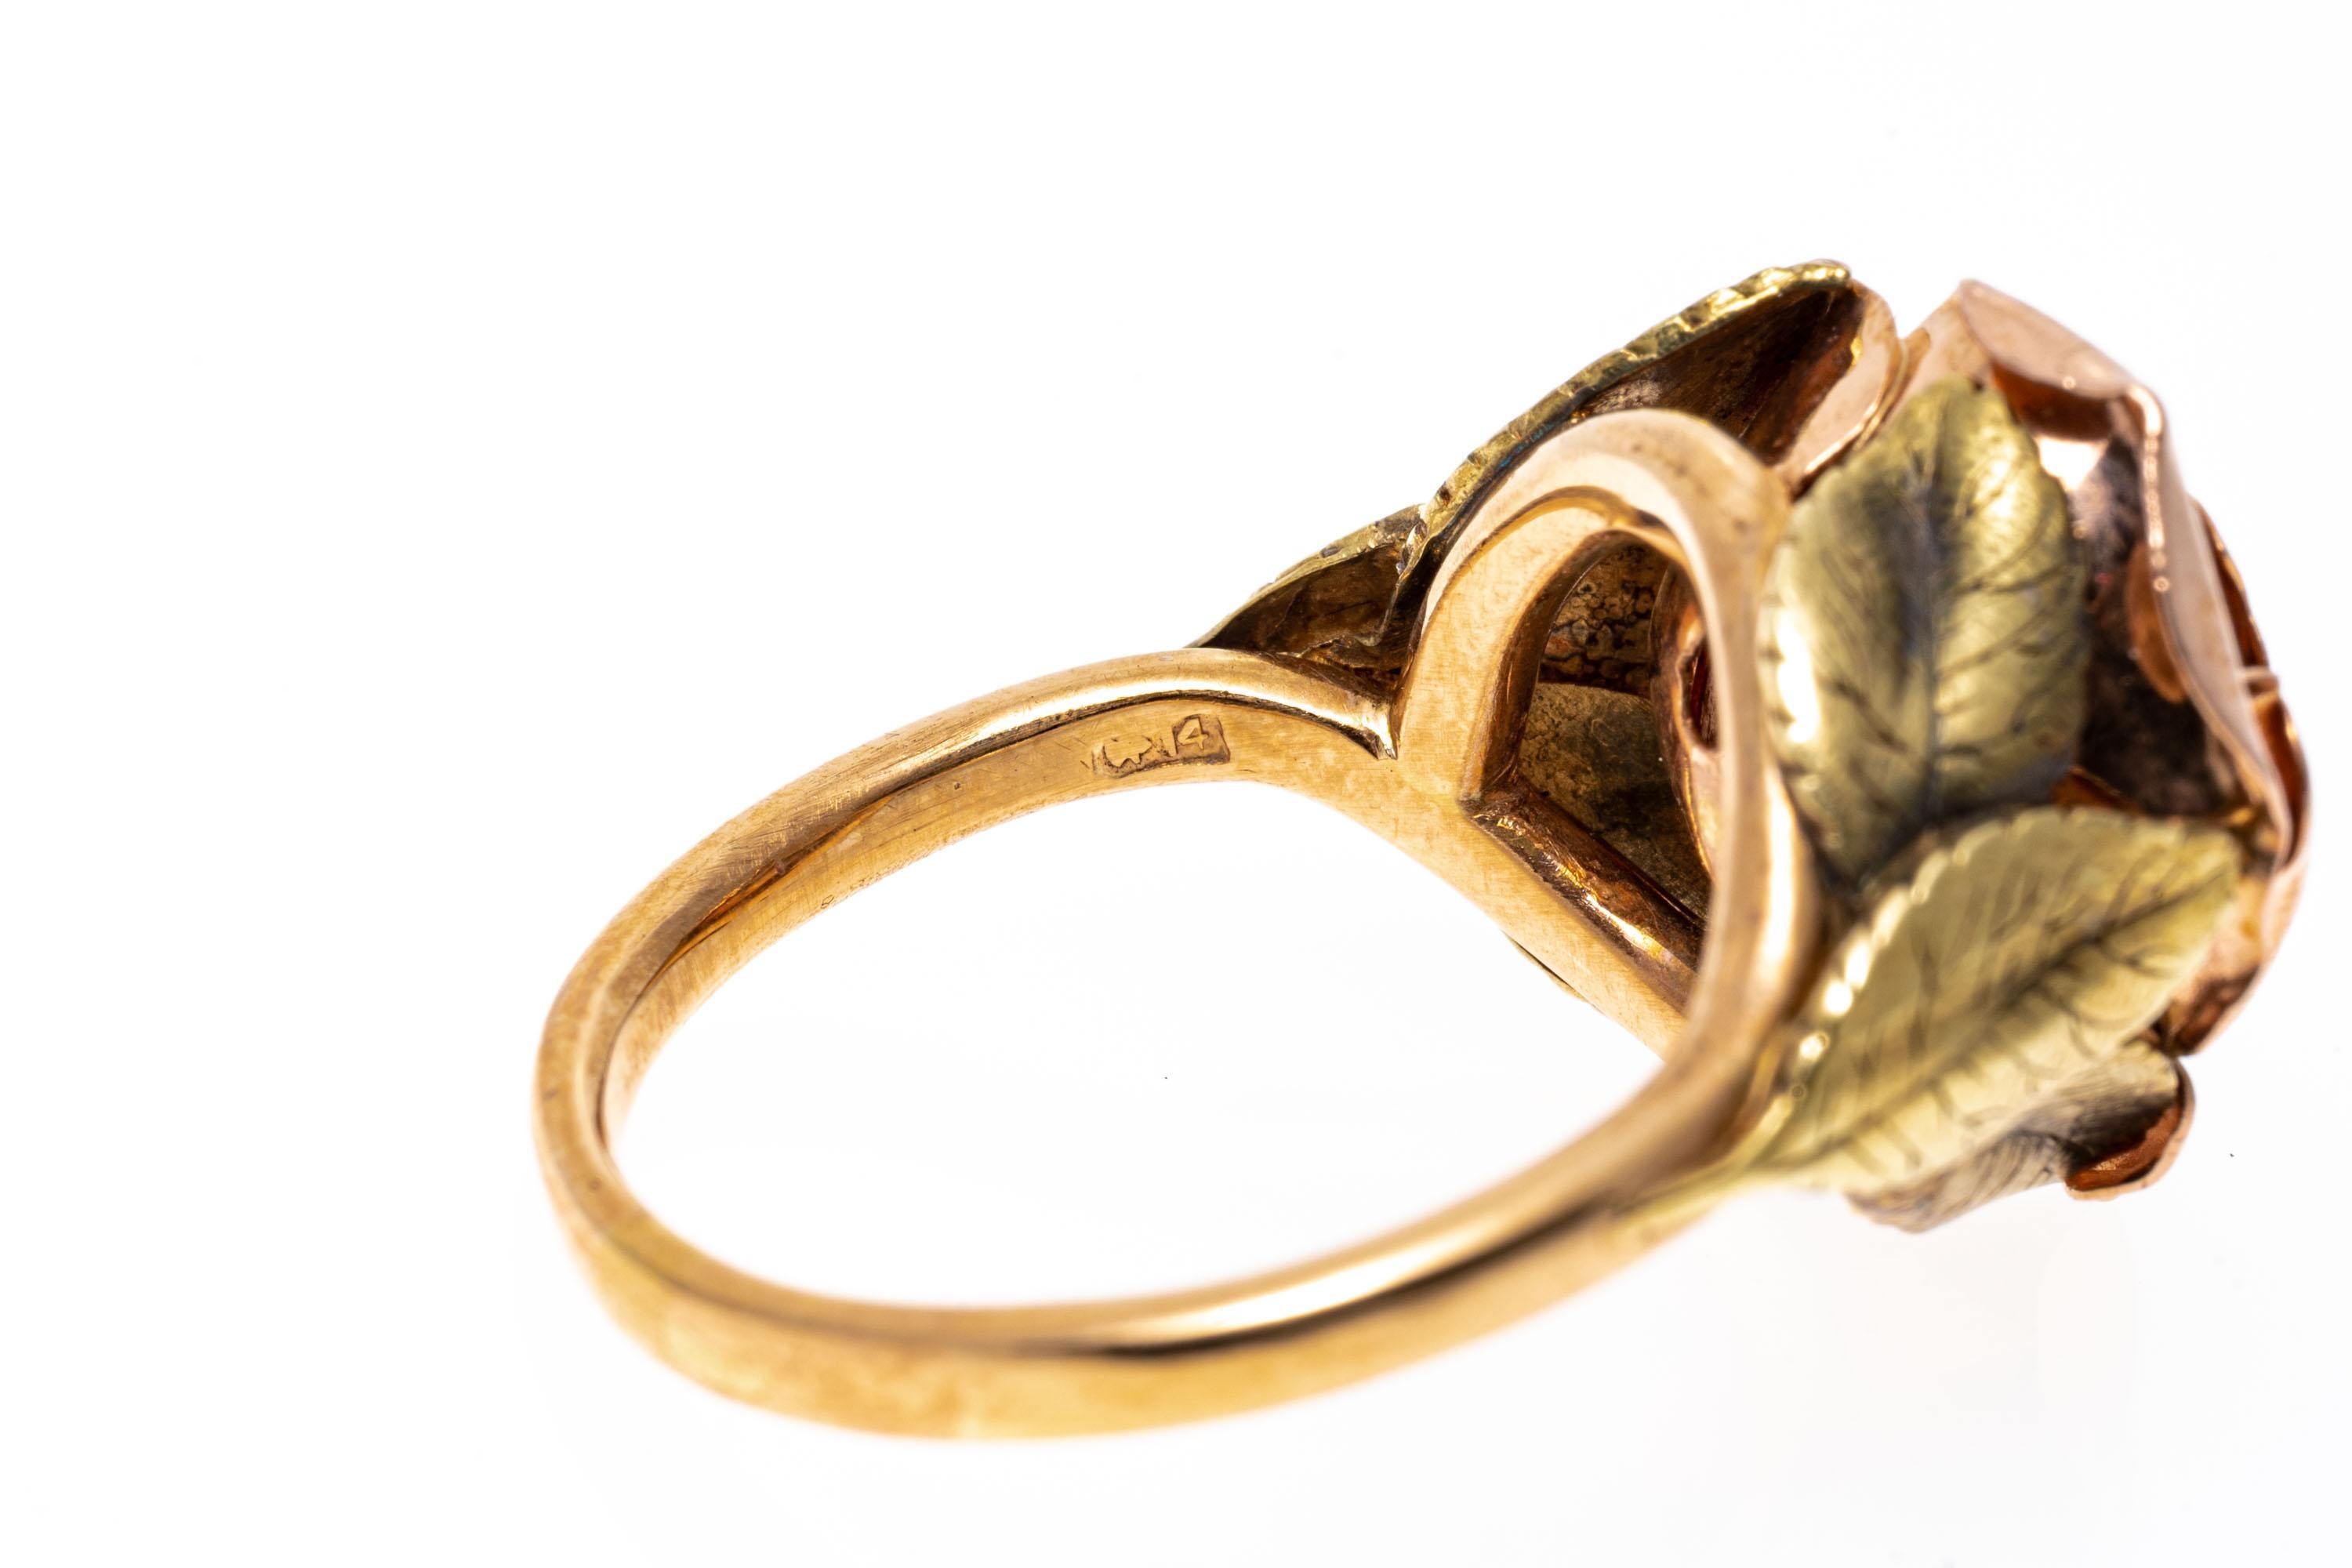 14k rose and yellow gold ring. This charming ring is a figural open rose motif, displayed in rose gold, and flanked by decorated leaf motif shoulders, displayed in yellow gold. The ring is finished with a high polished rose gold shank.
Marks: